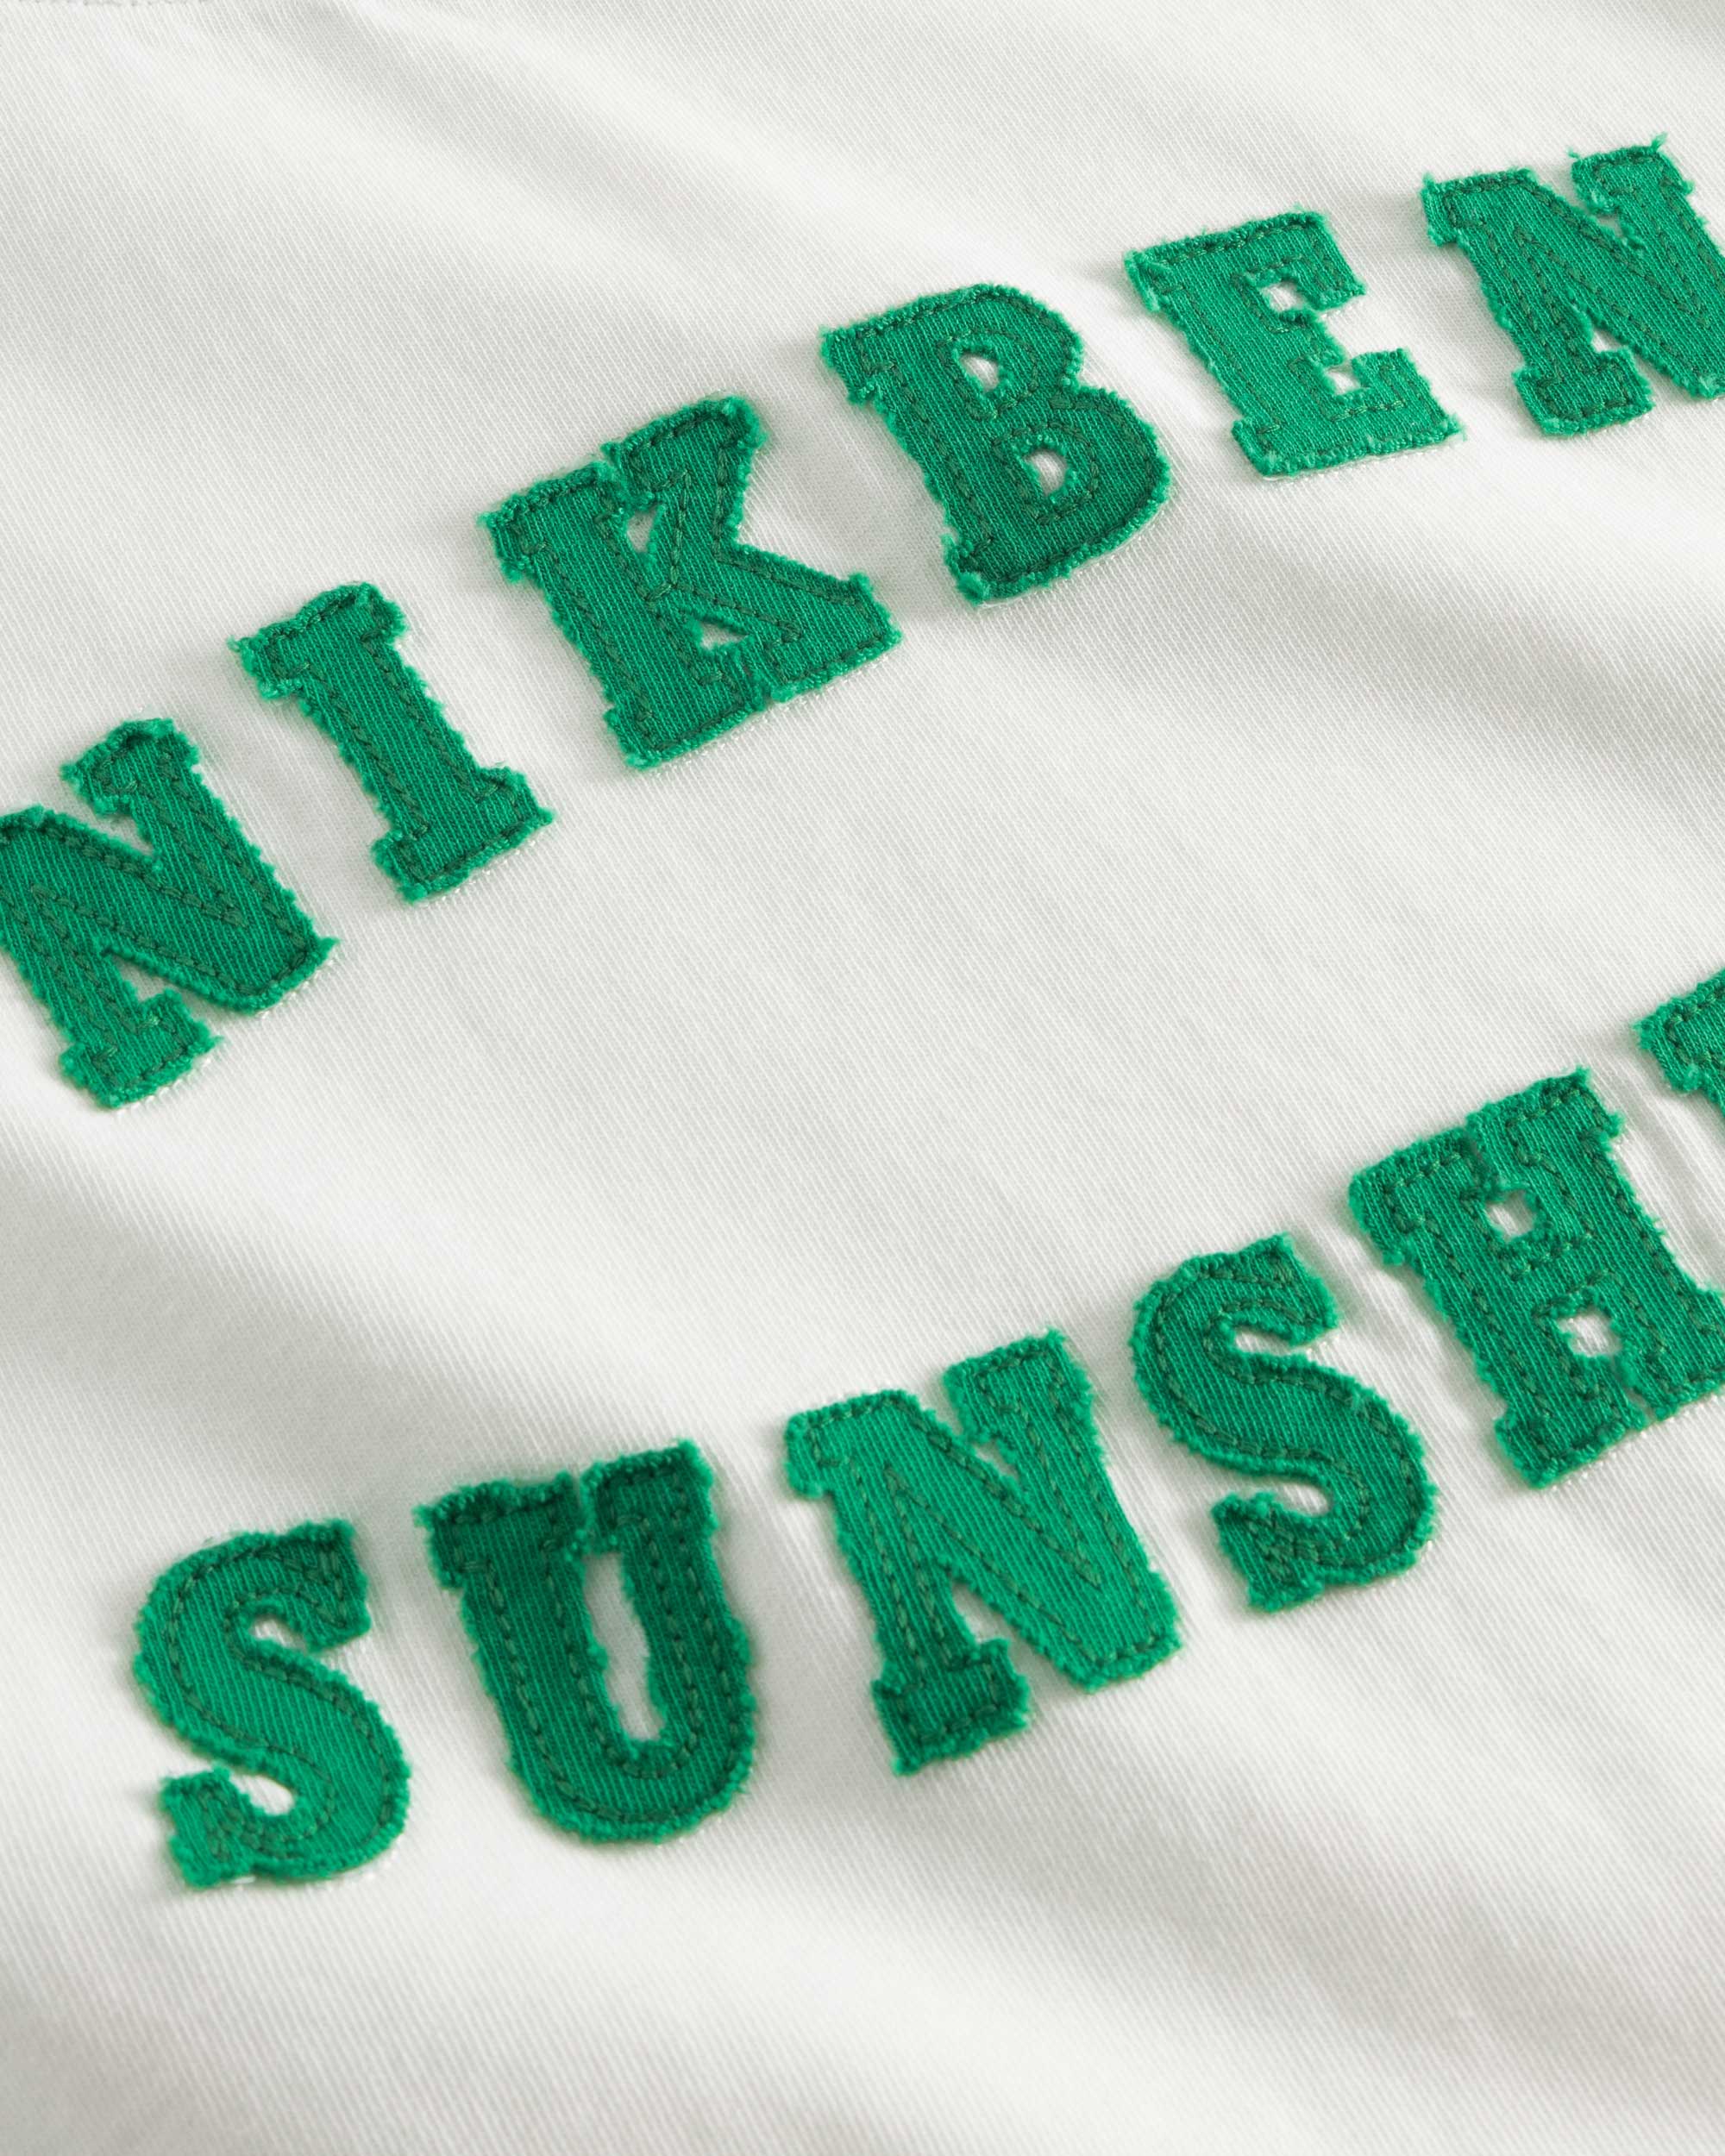 Close up view of "Nikben Sunshine" text on white t-shirt.